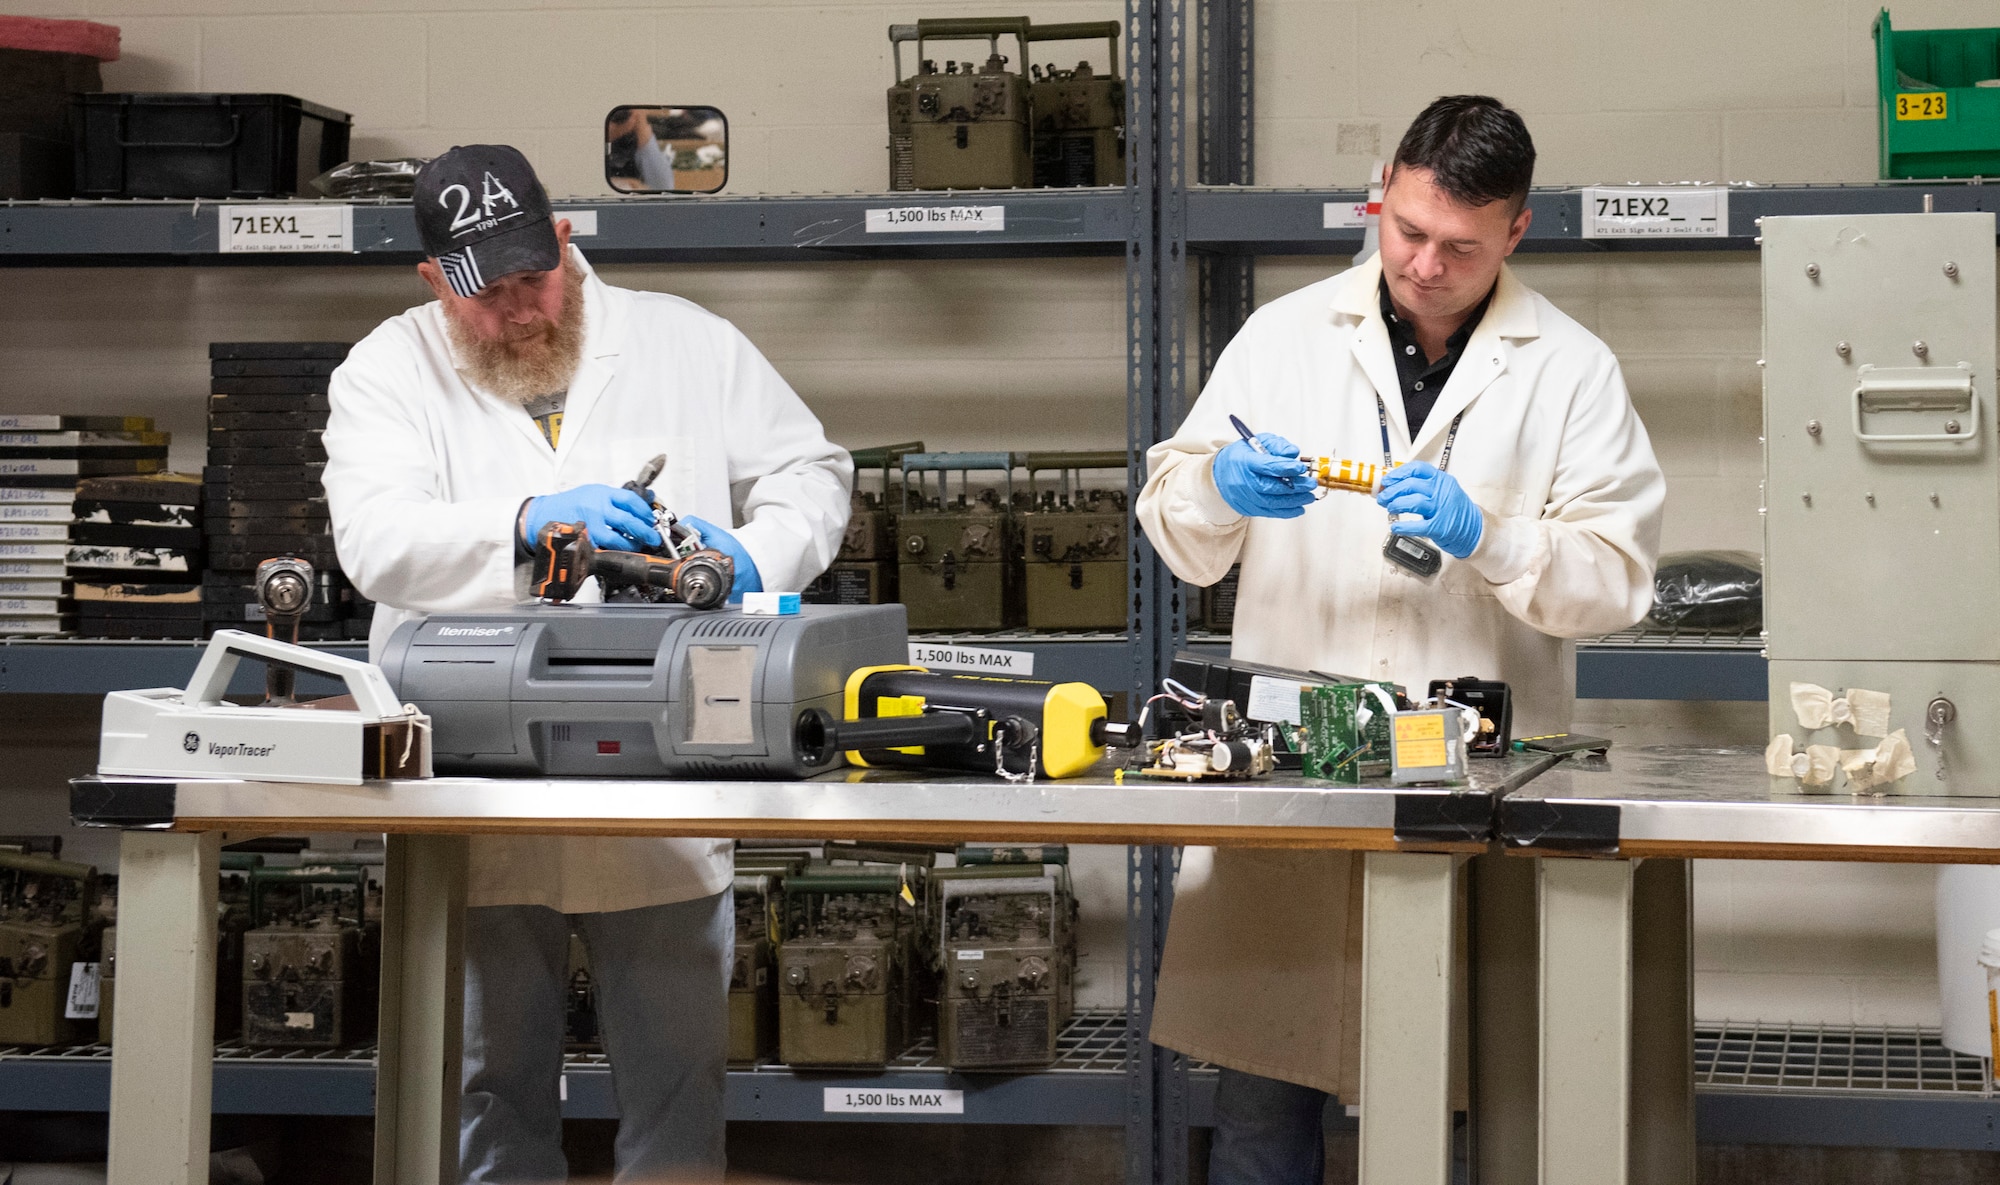 Charlie Mitchell (left) and Seth Walton (right) inspect and remove radioactive components from pieces of equipment at the Air Force Radioactive Recycling and Disposal facility at Wright-Patterson Air Force Base, Ohio. AFRRAD won the 2022 Secretary of Defense Environmental Award for Environmental Quality. (U.S. Air Force photo by Jaima Fogg)